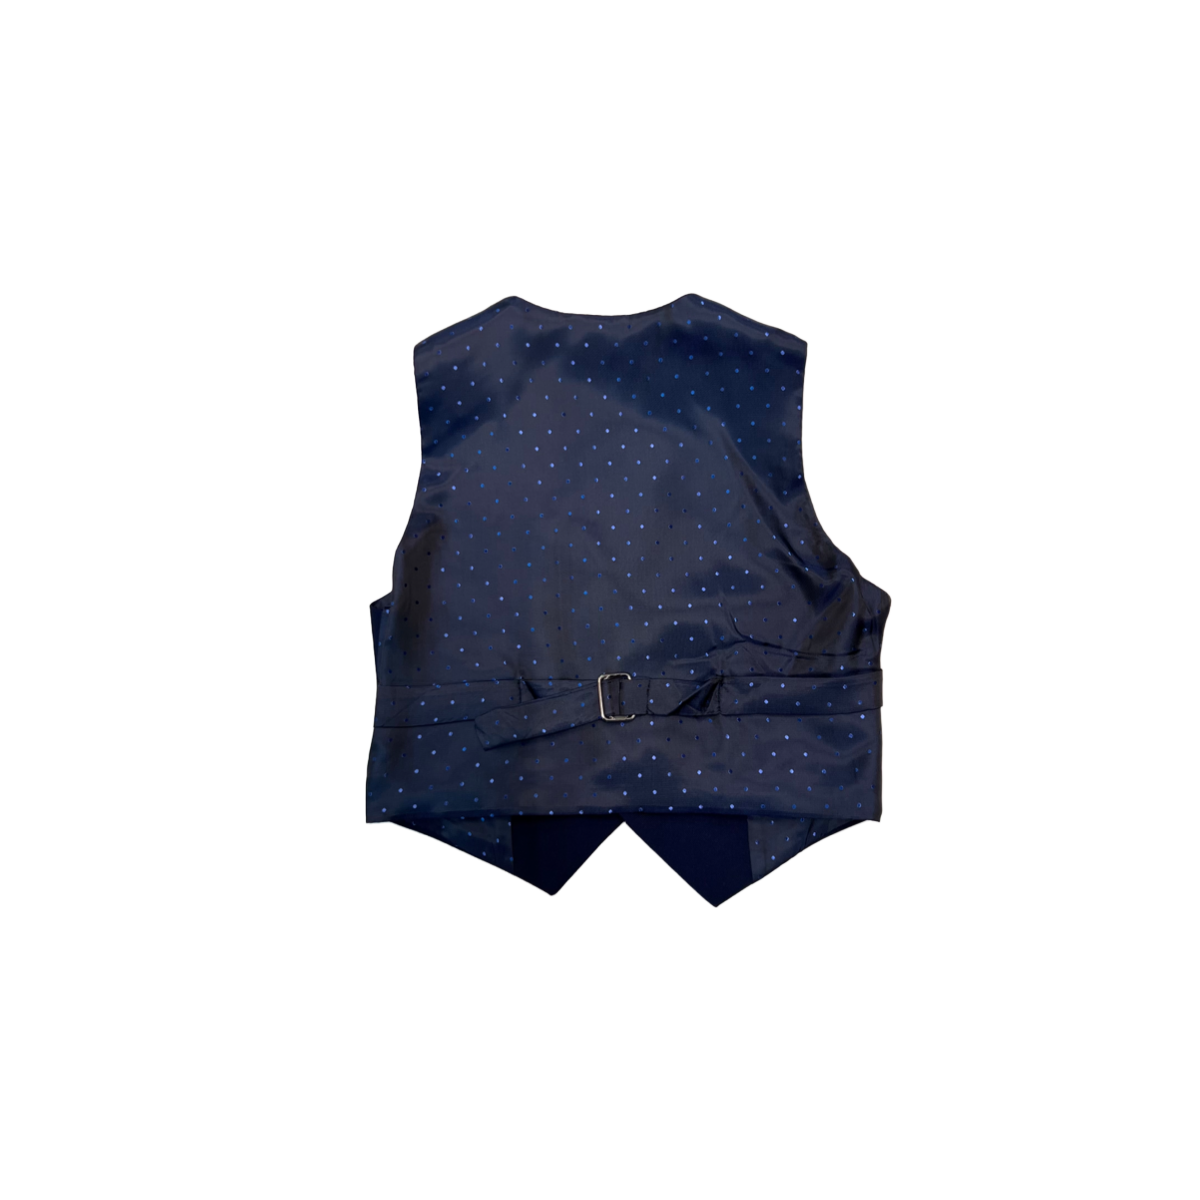 Fouger U.S.A. Slim/Modern Fit 3-Piece Baby Navy Suit